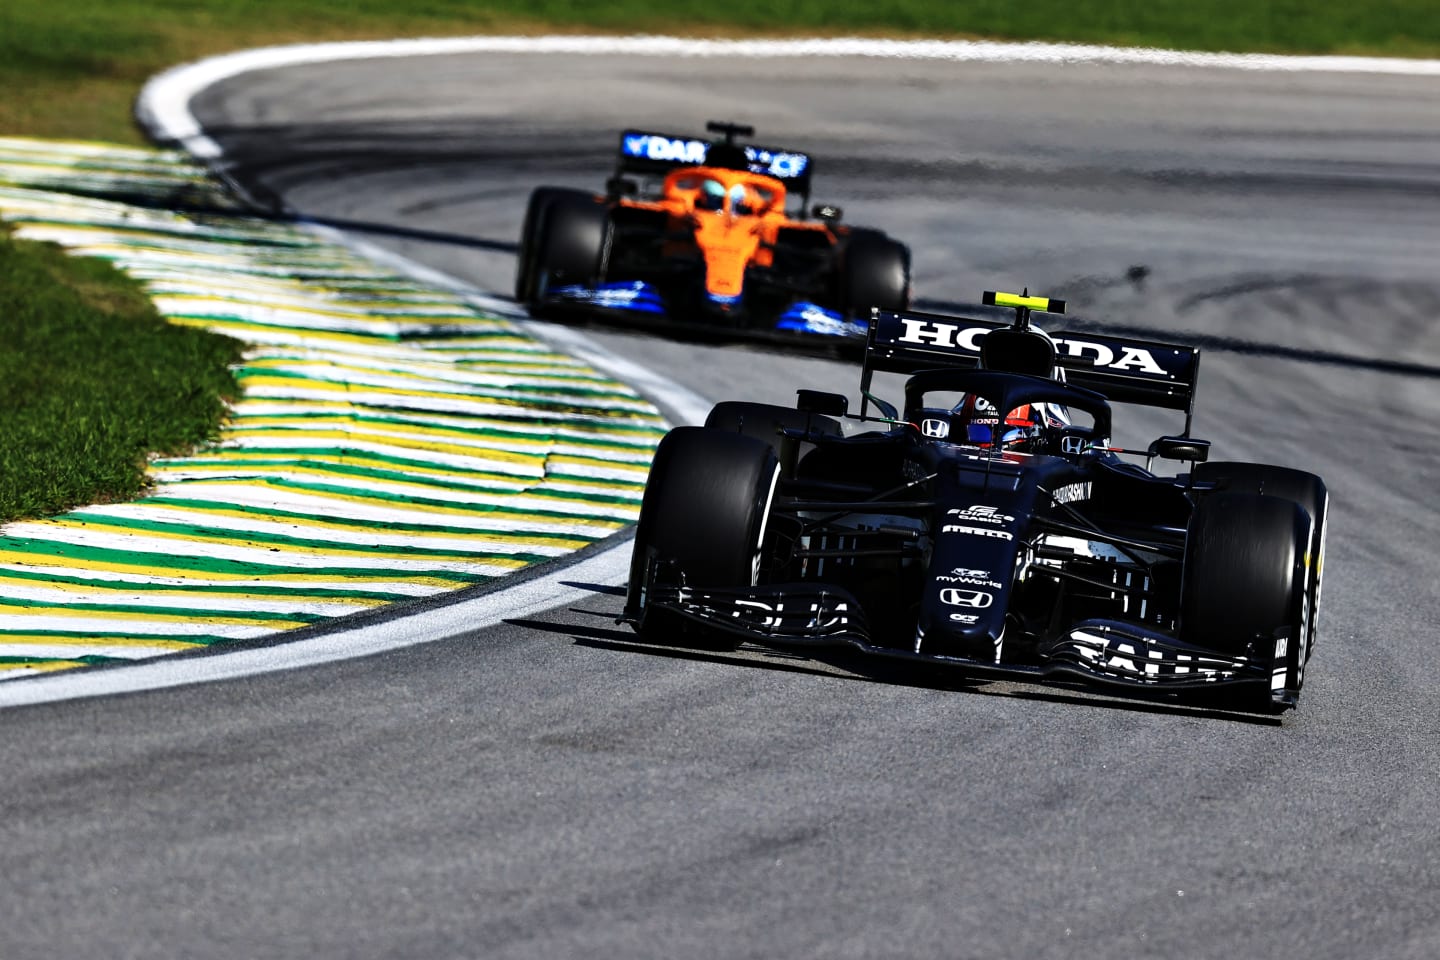 SAO PAULO, BRAZIL - NOVEMBER 14: Pierre Gasly of France driving the (10) Scuderia AlphaTauri AT02 Honda during the F1 Grand Prix of Brazil at Autodromo Jose Carlos Pace on November 14, 2021 in Sao Paulo, Brazil. (Photo by Buda Mendes/Getty Images)